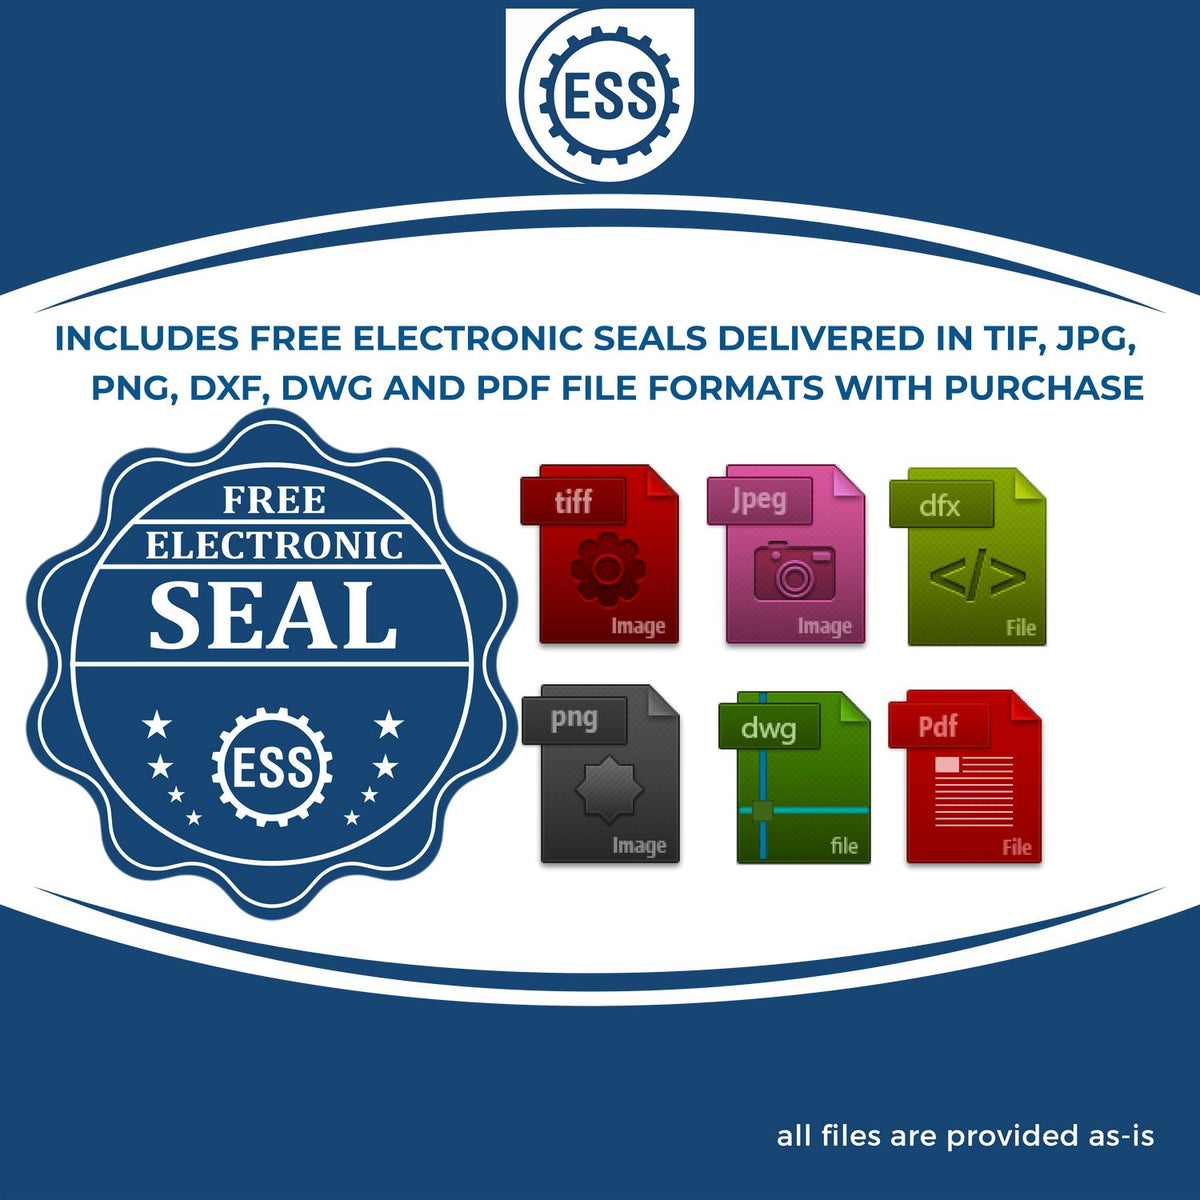 An infographic for the free electronic seal for the Gift Maryland Land Surveyor Seal illustrating the different file type icons such as DXF, DWG, TIF, JPG and PNG.